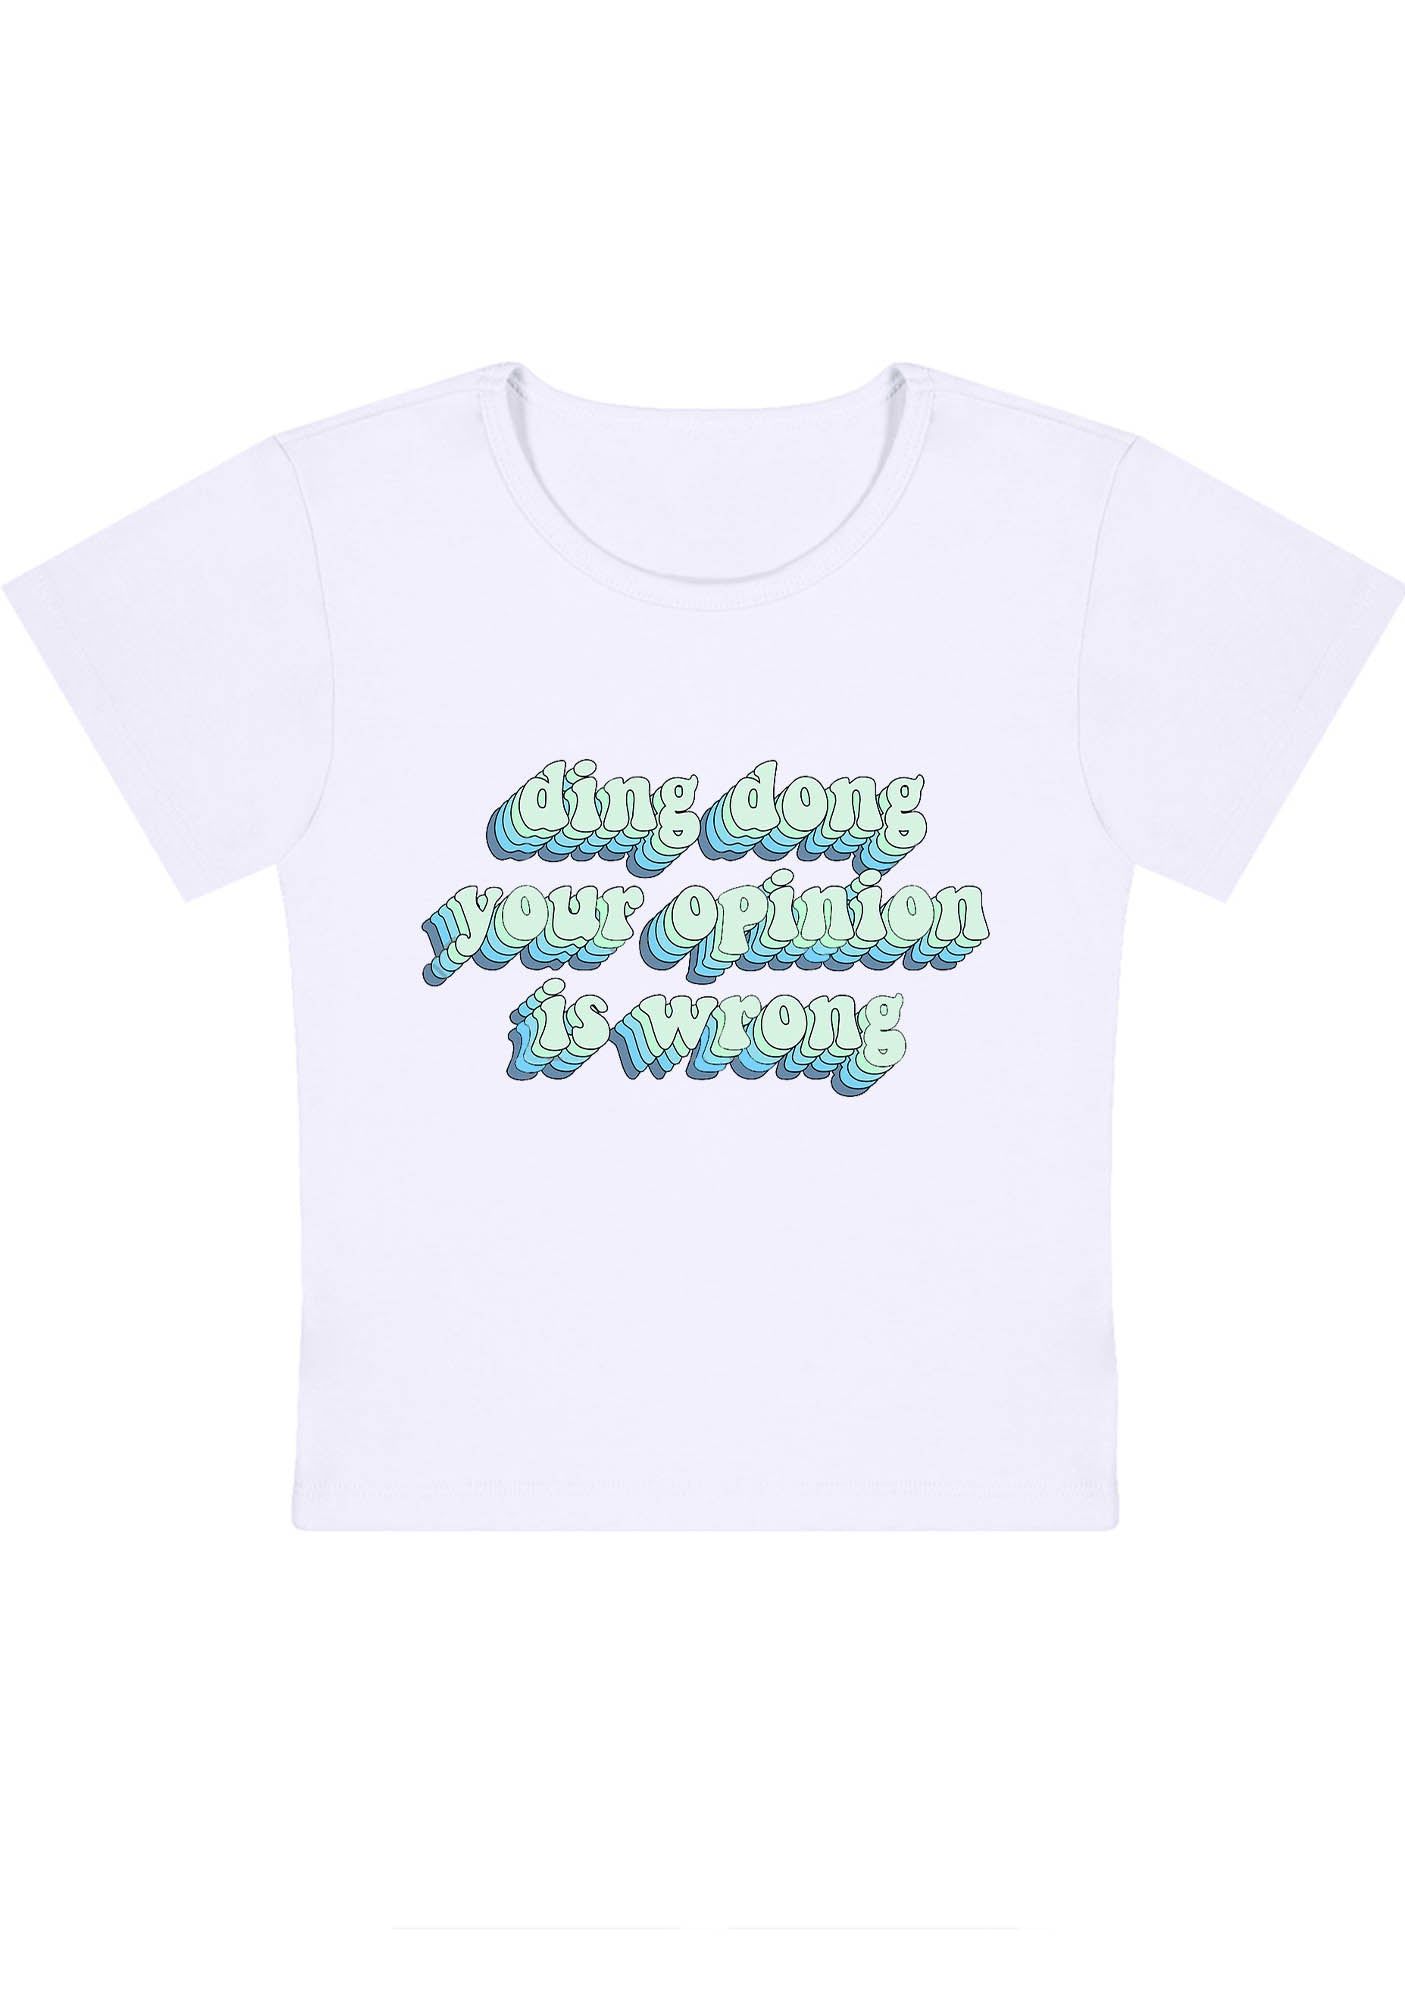 Curvy Ding Dong Your Opinion Is Wrong Baby Tee